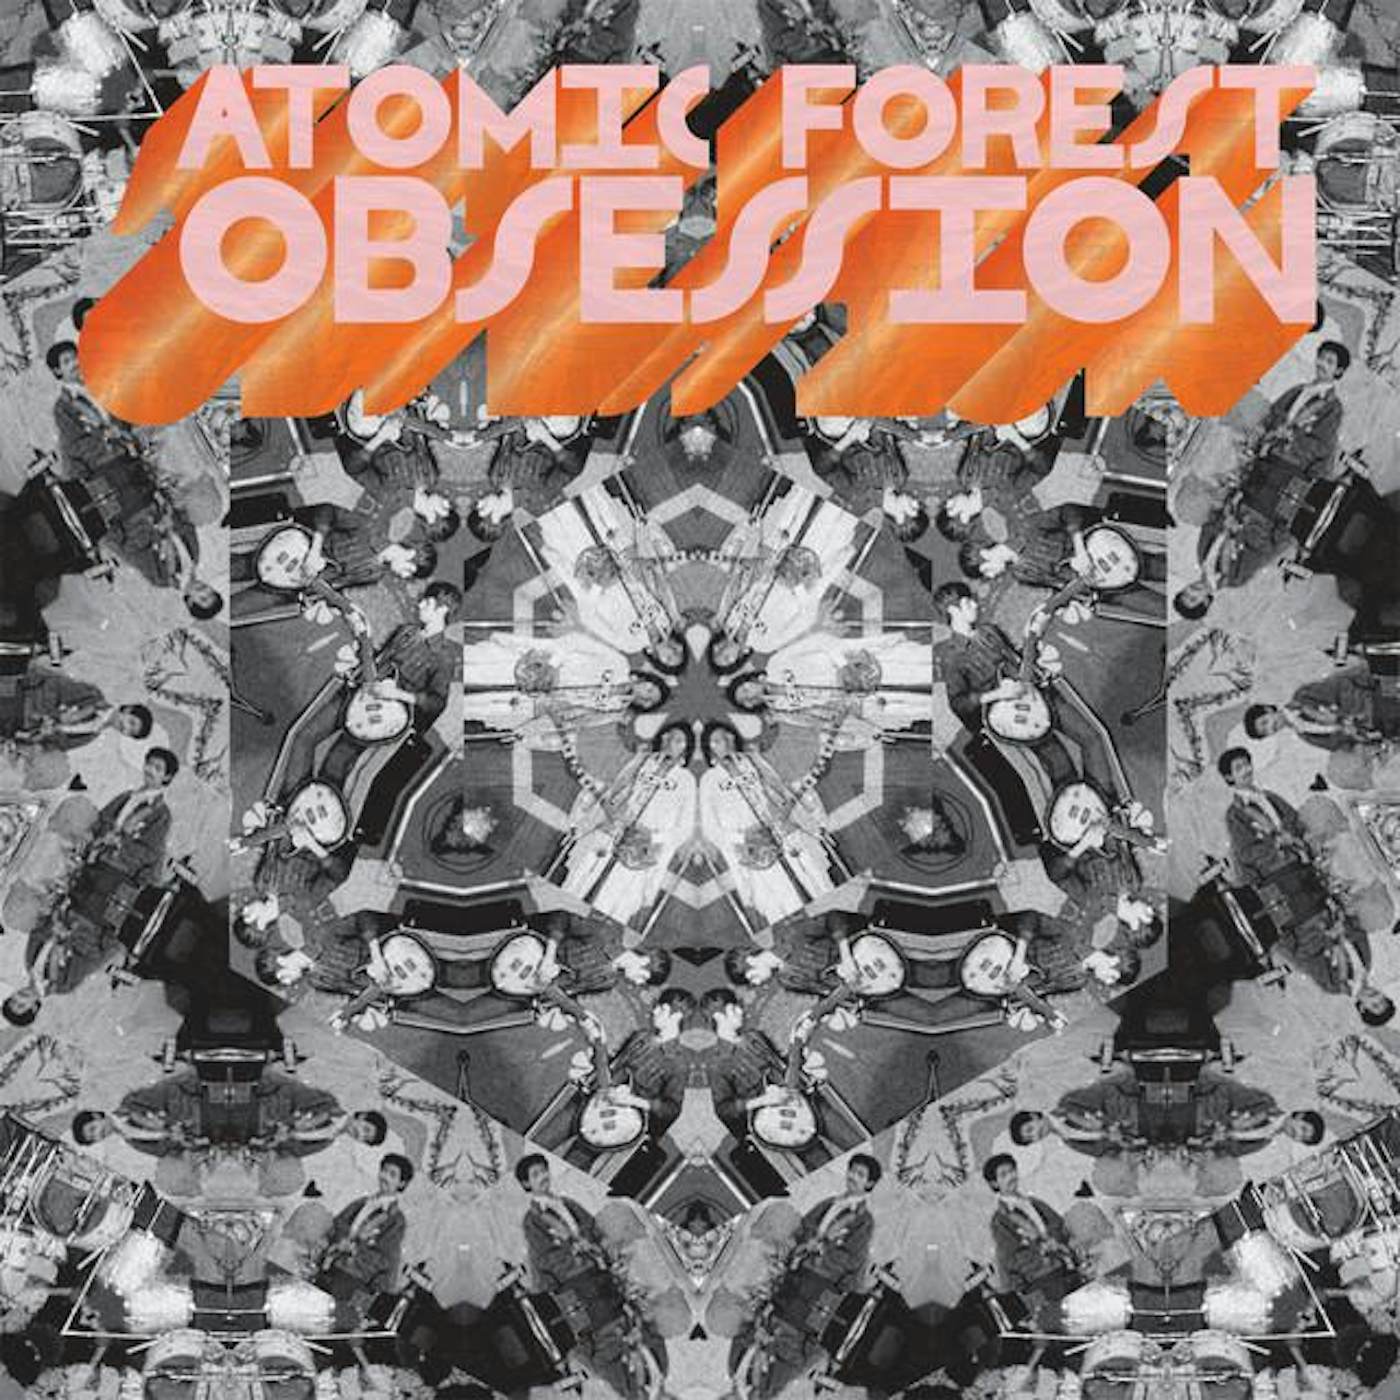 Atomic Forest